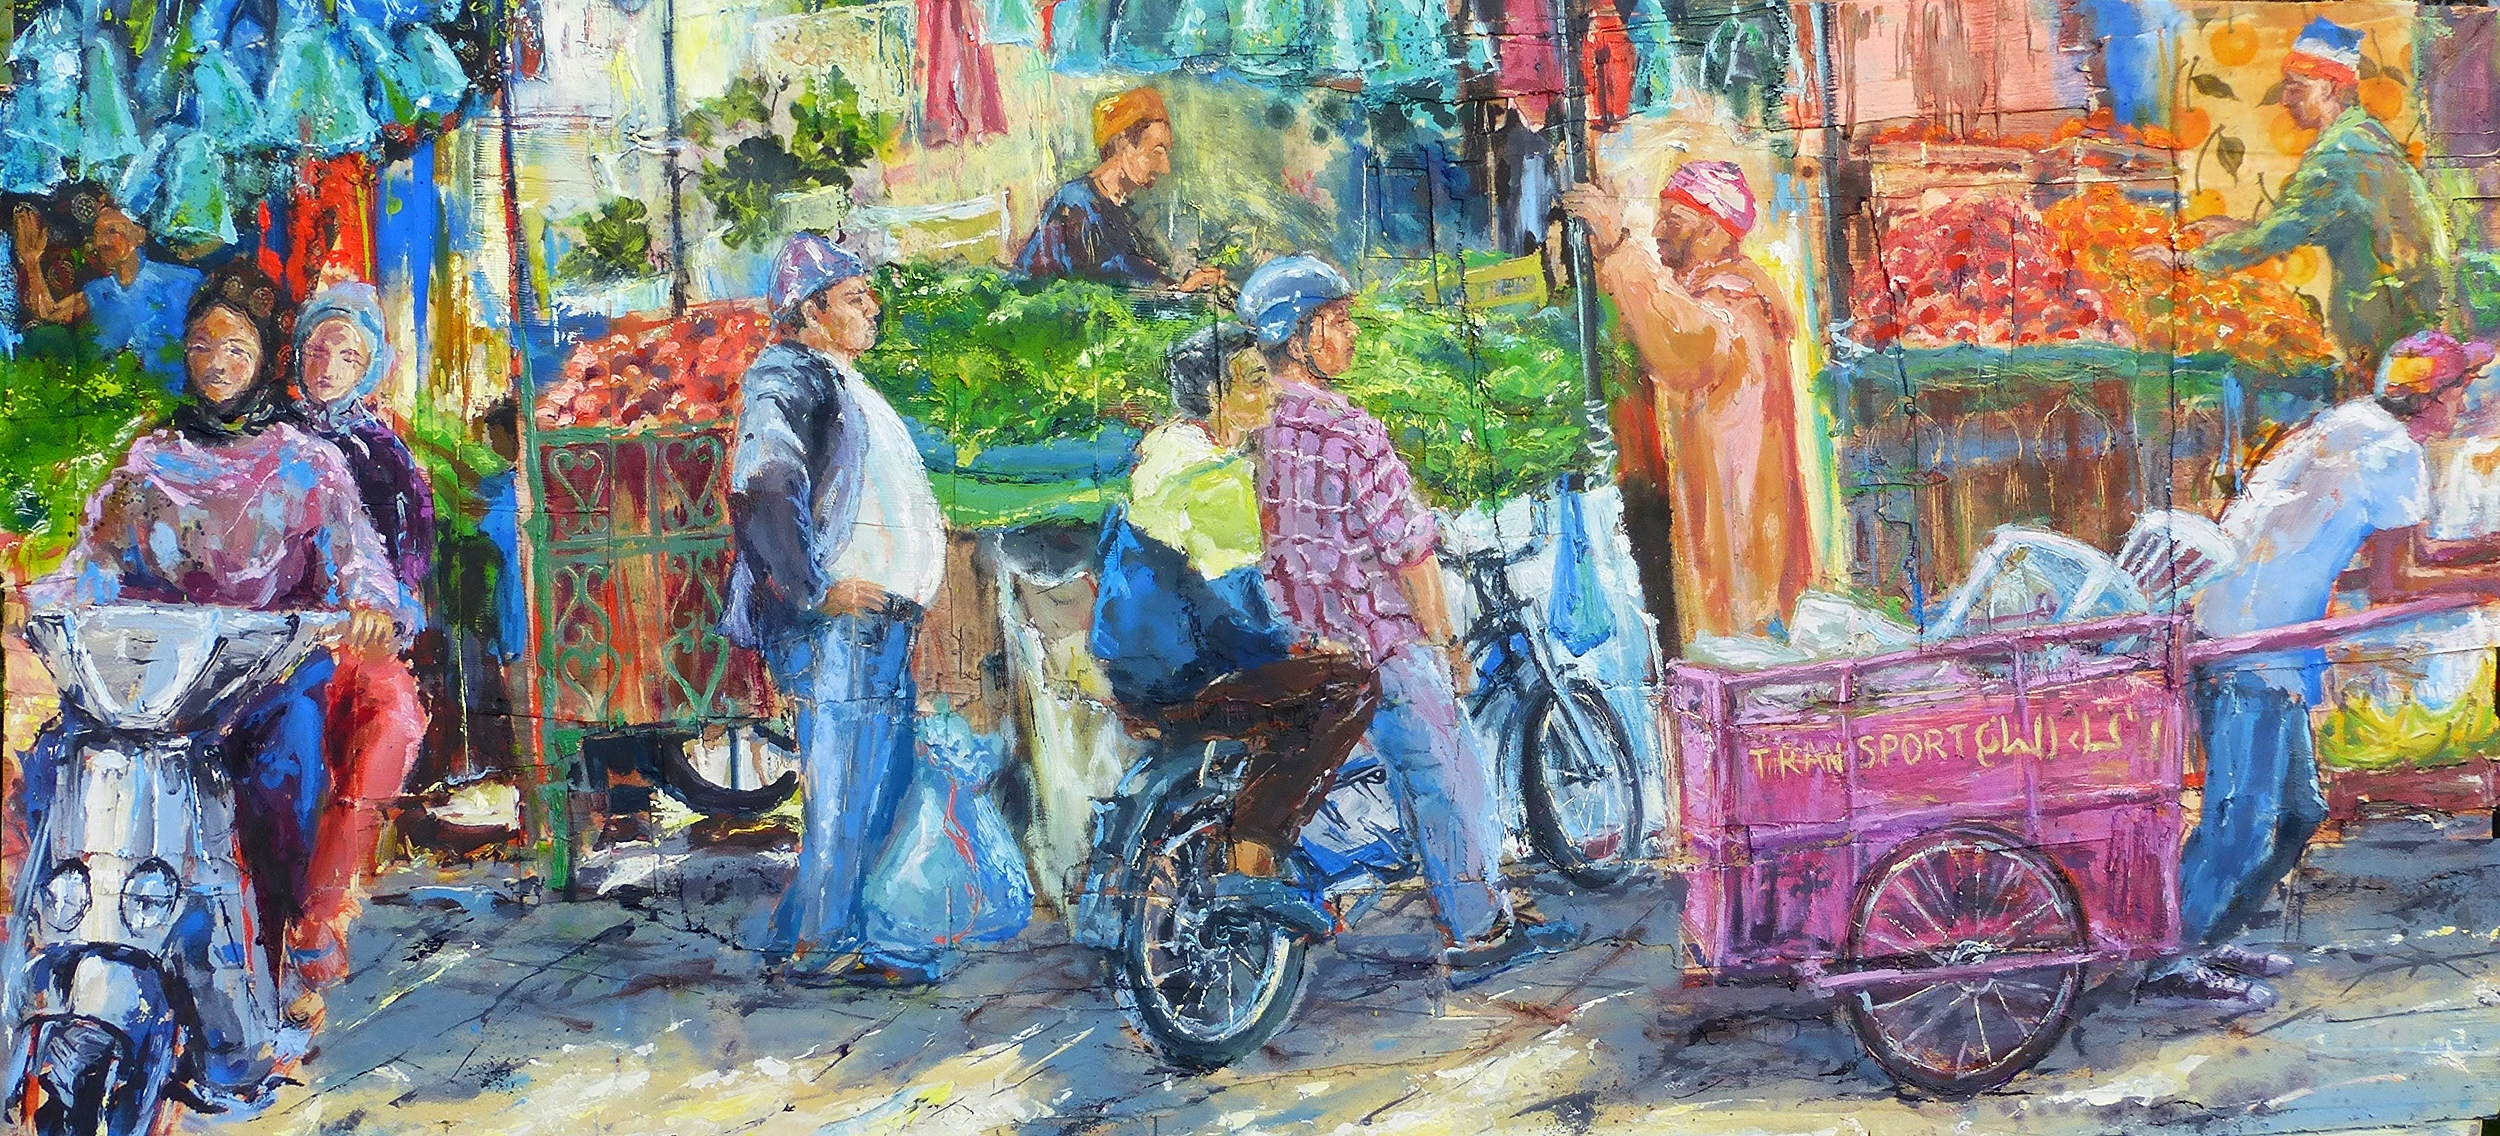 Marrakech Souk, Morocco, Oil and collage on wood